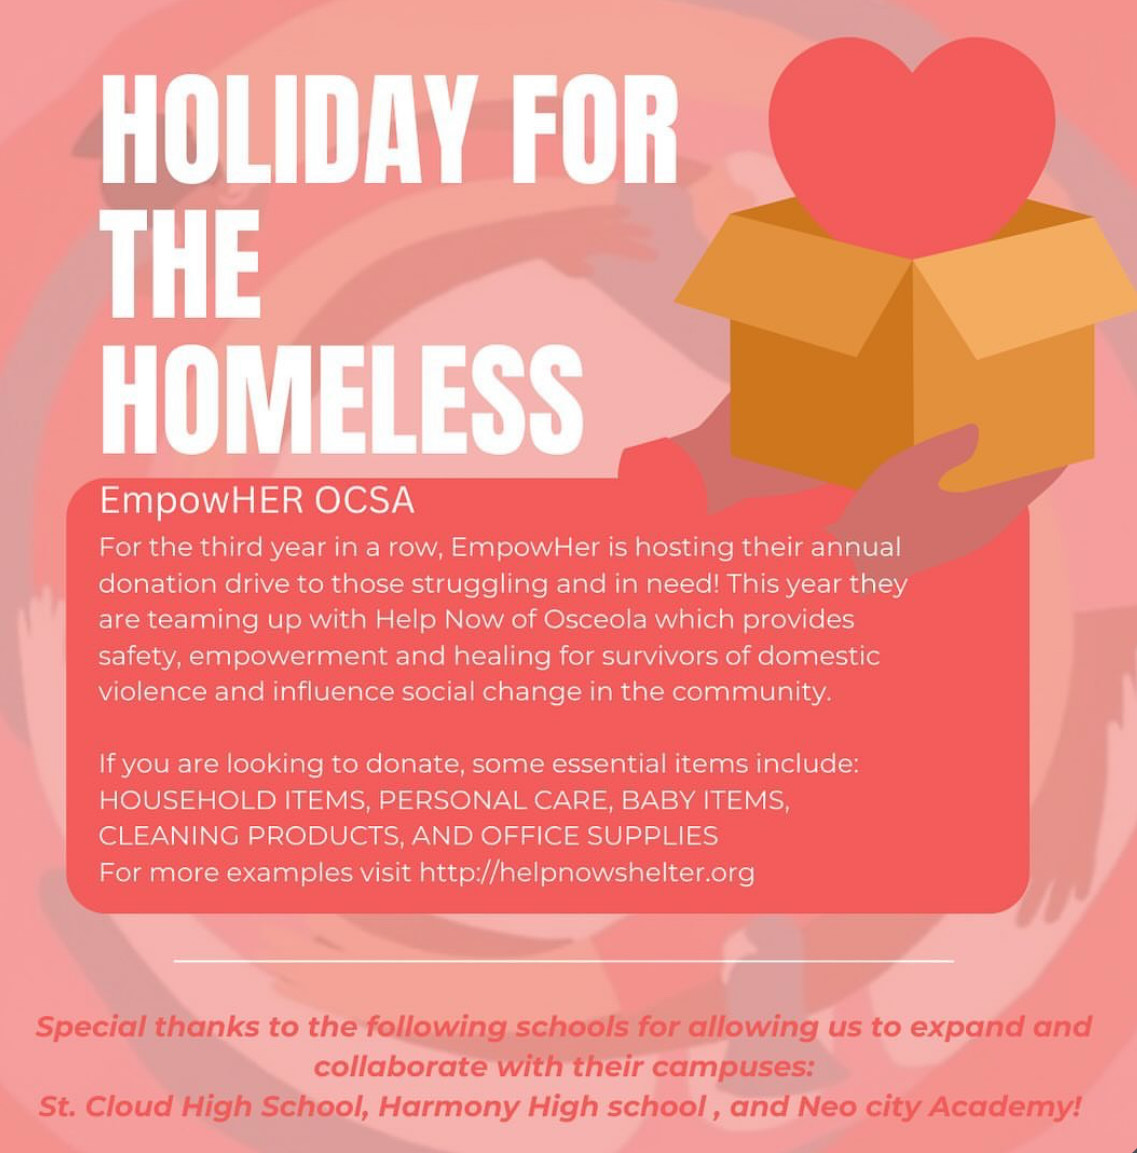 EmpowerHERs+Holiday+for+the+Homeless+drive+is+here.+